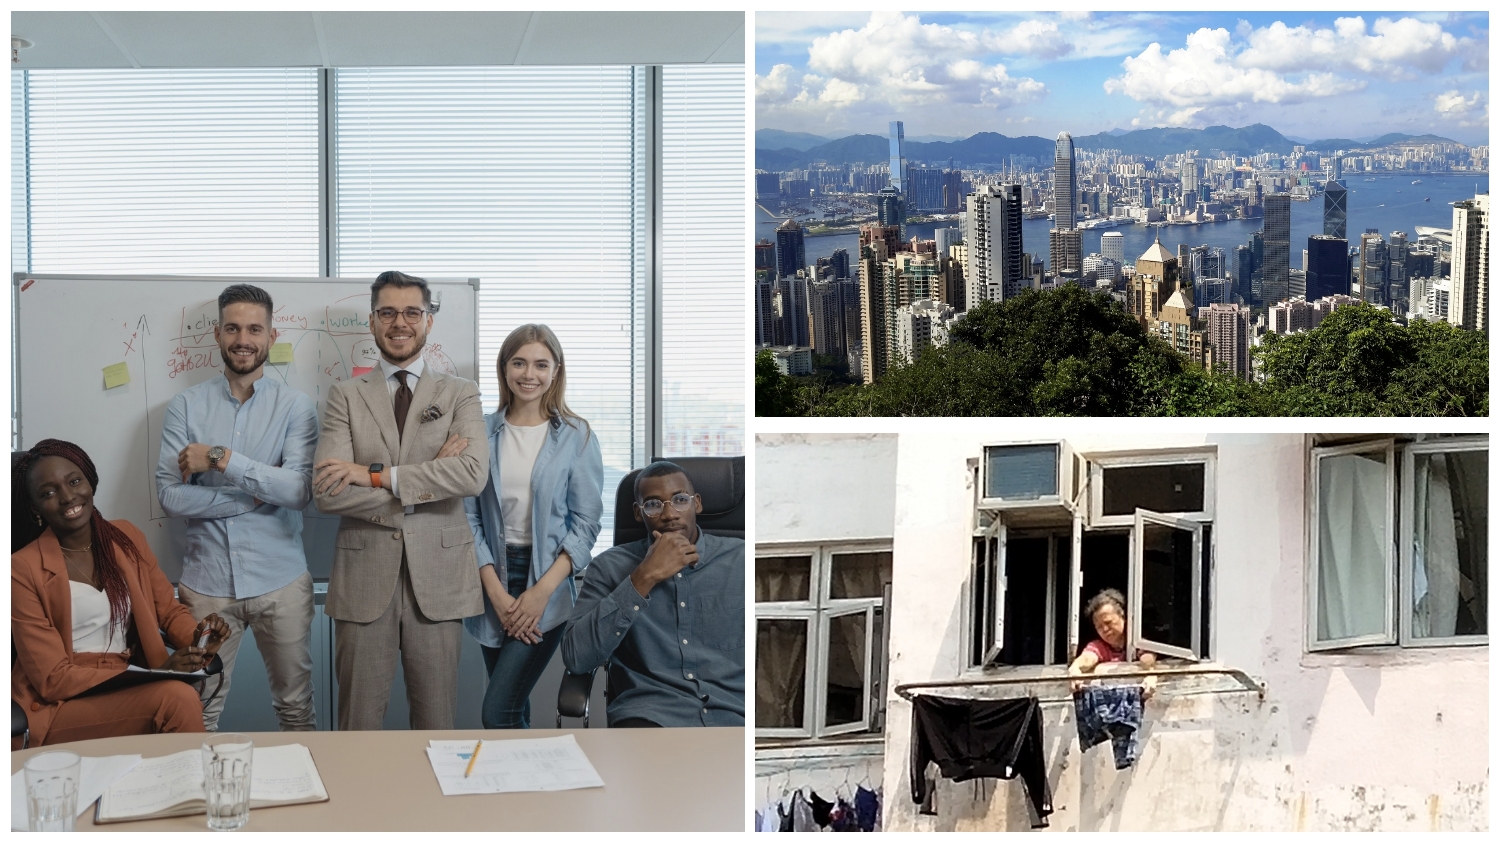 Foreign expats can ask a "made in Hong Kong" private tour guide about Hong Kong's National Security Law and pandemic management